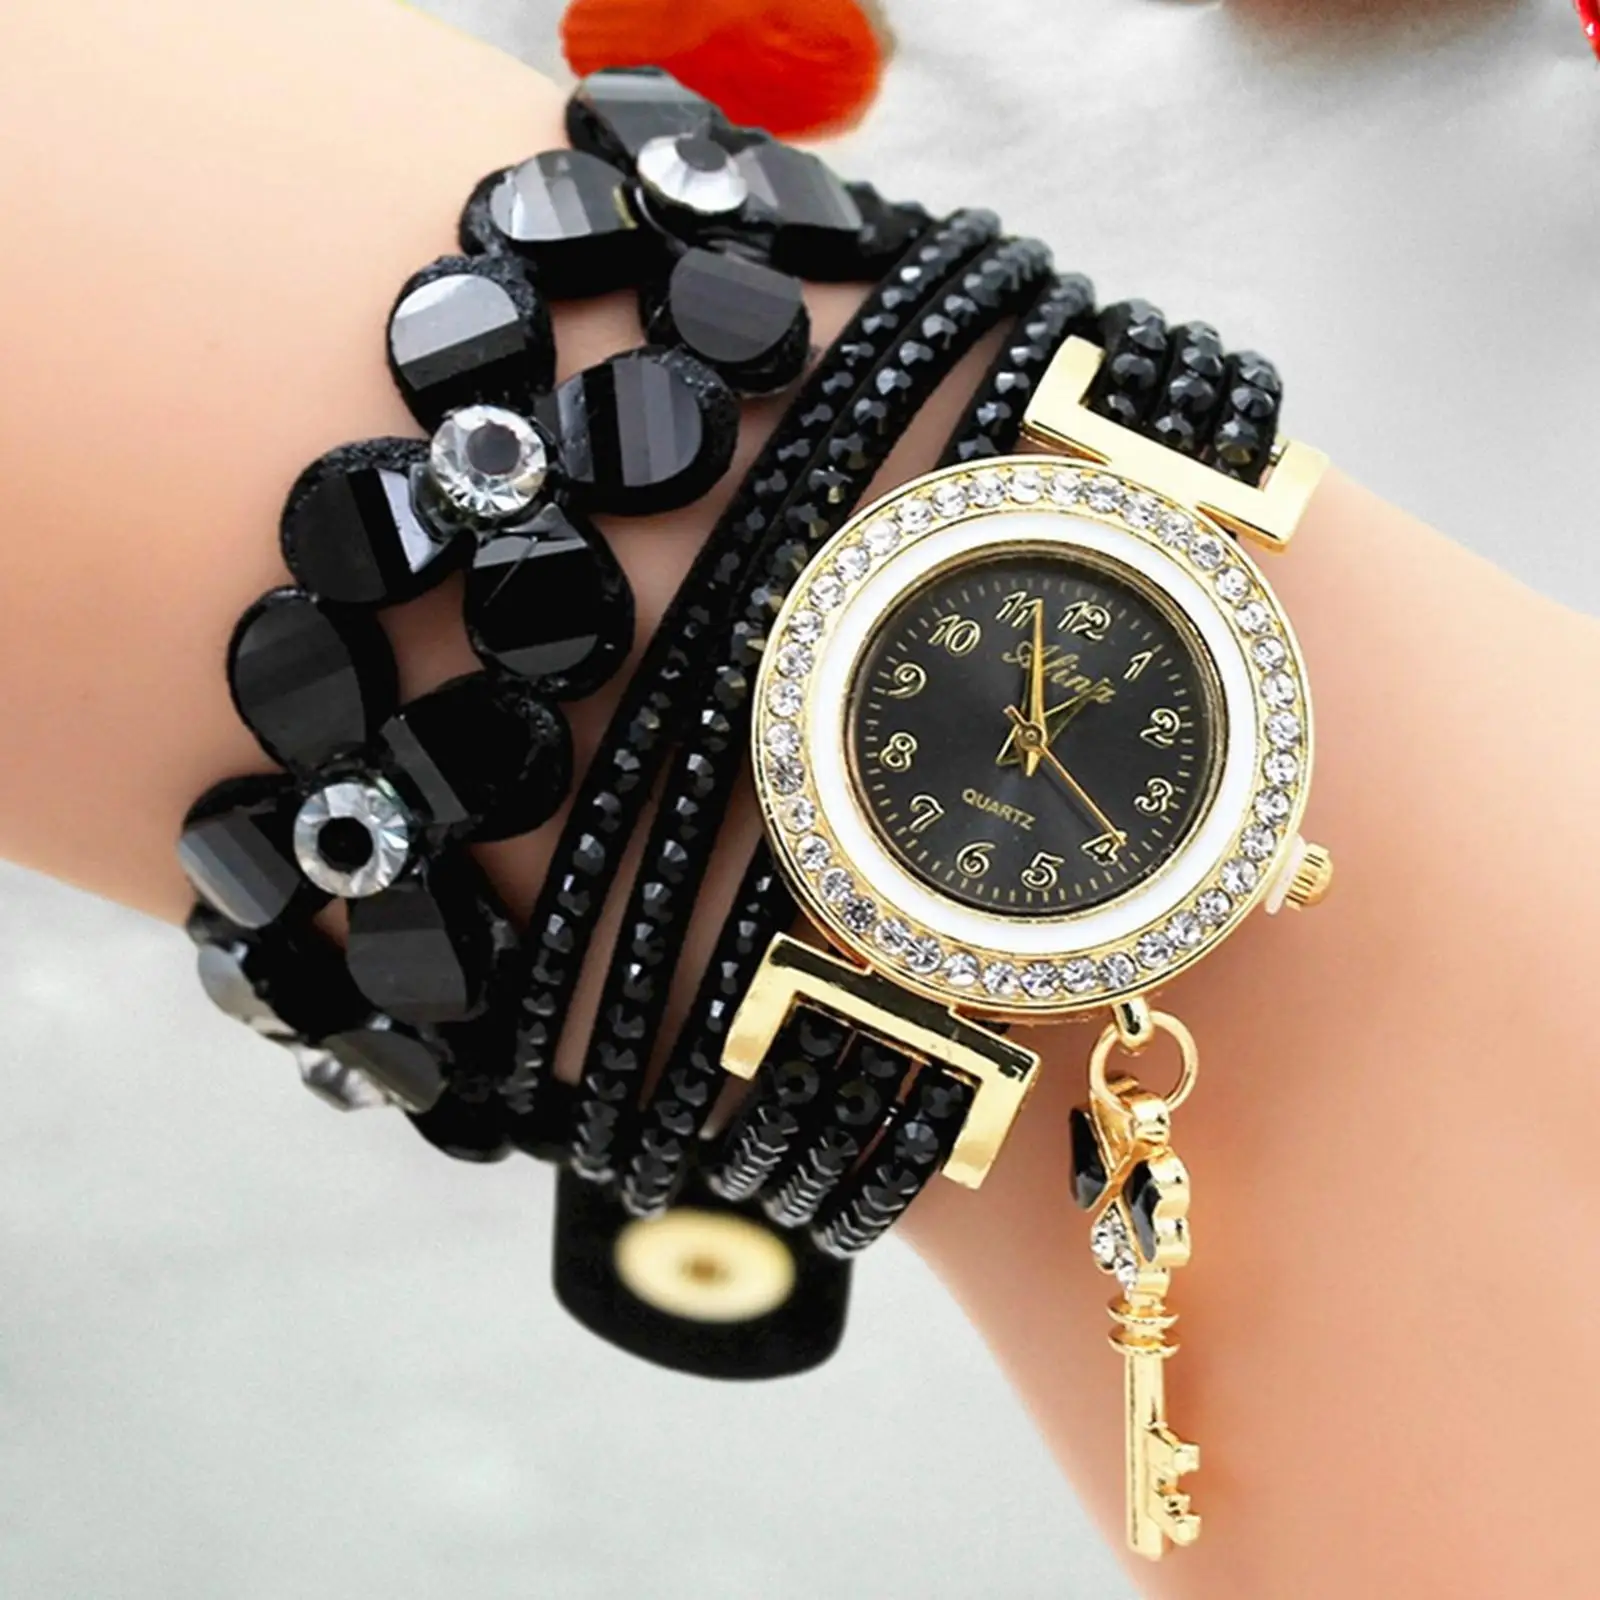 Bracelet Watch Women Decorative Versatile Portable Wrist Watch for Camping Shopping Fishing Outdoor Activities Birthday Gift